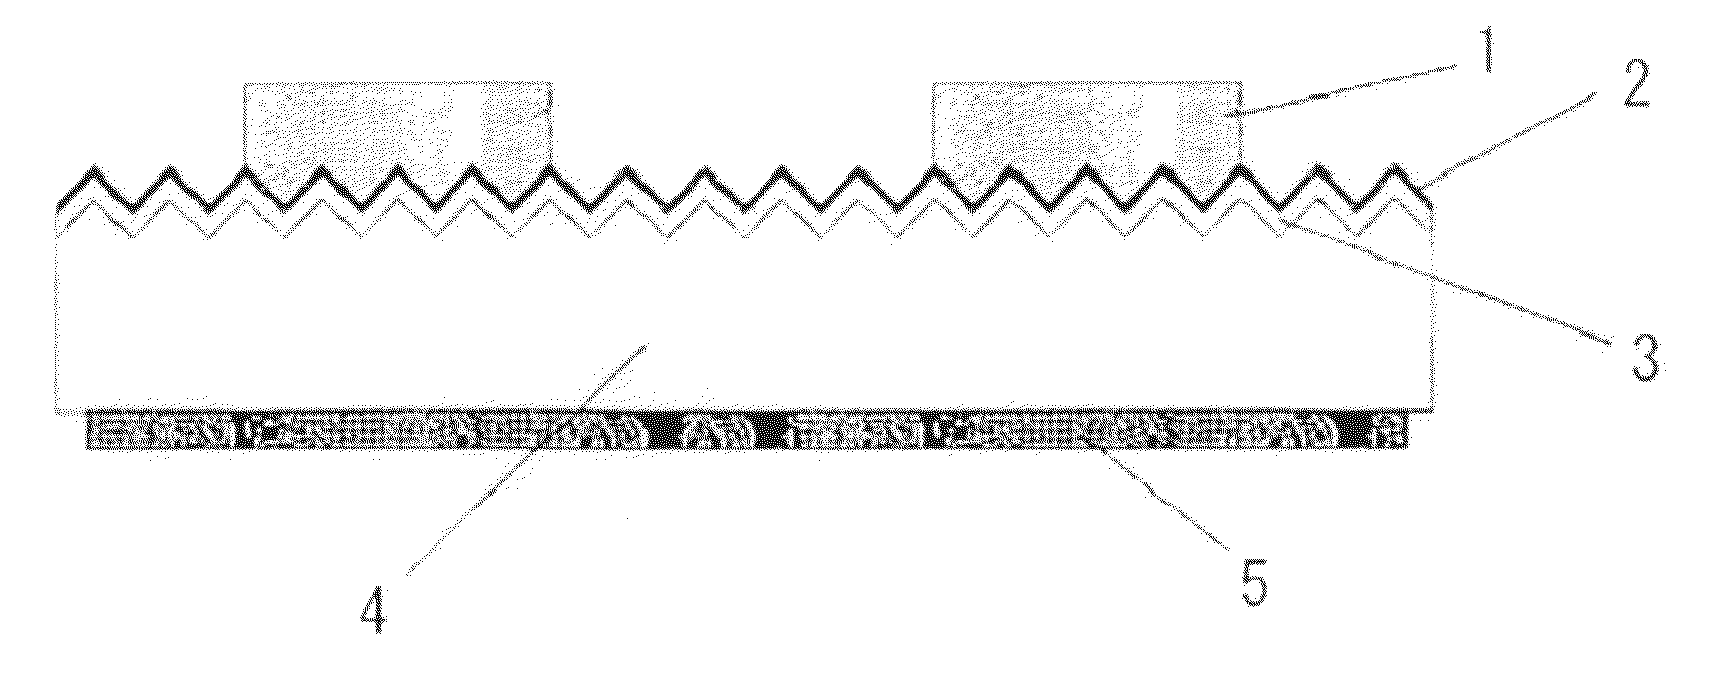 Conductive paste for forming a solar cell electrode